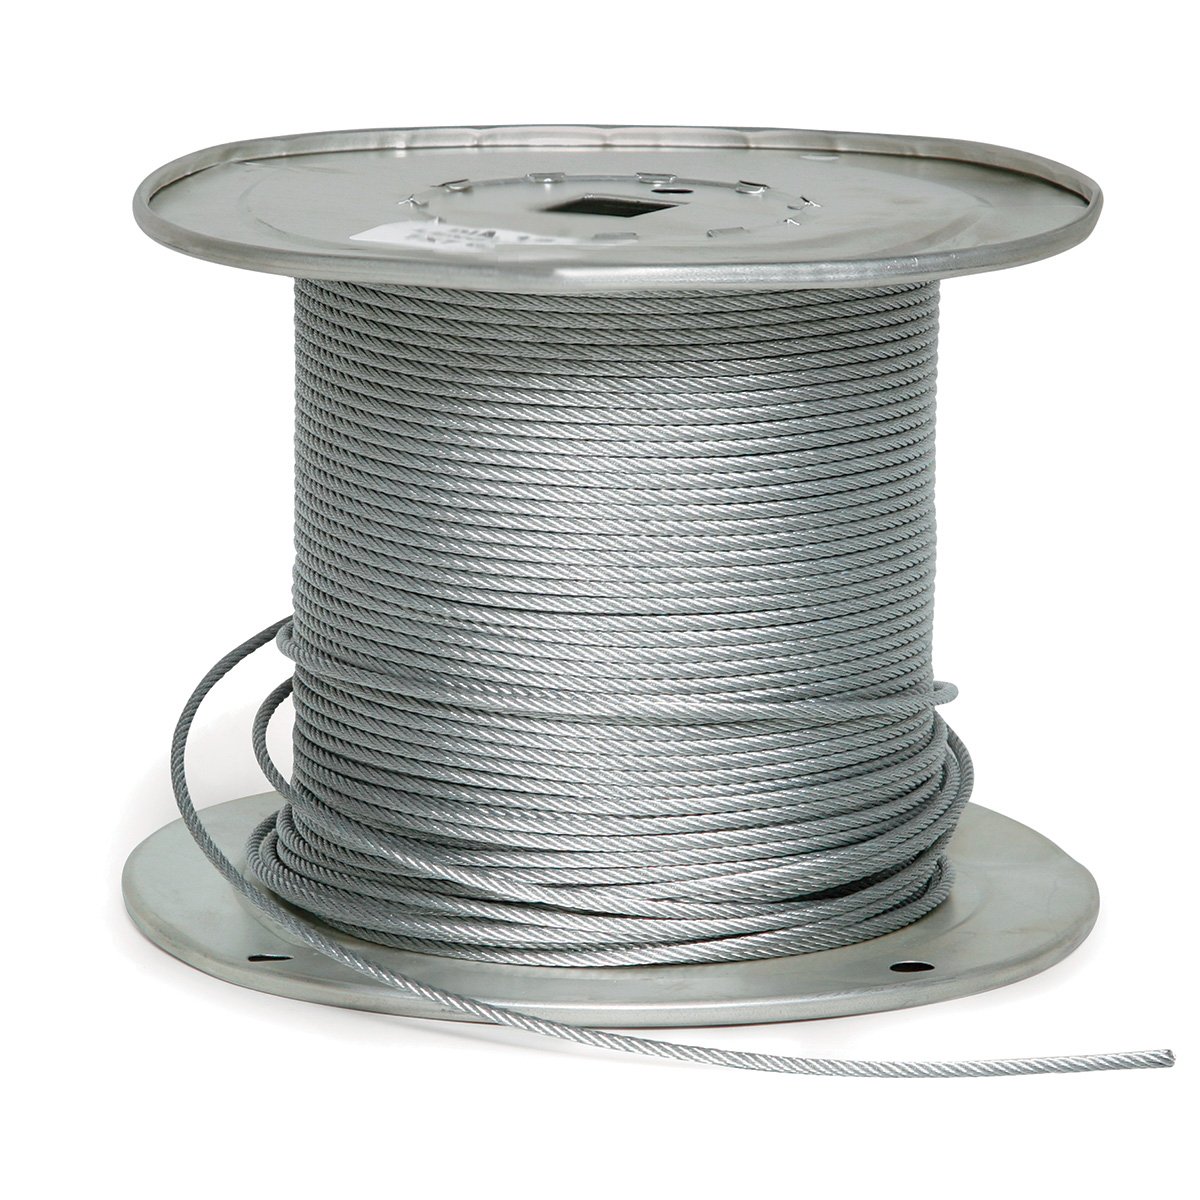 2g9250-00500 0.25 Dia. X 500 Ft. 7 X 19 Galvanized Aircraft Cable